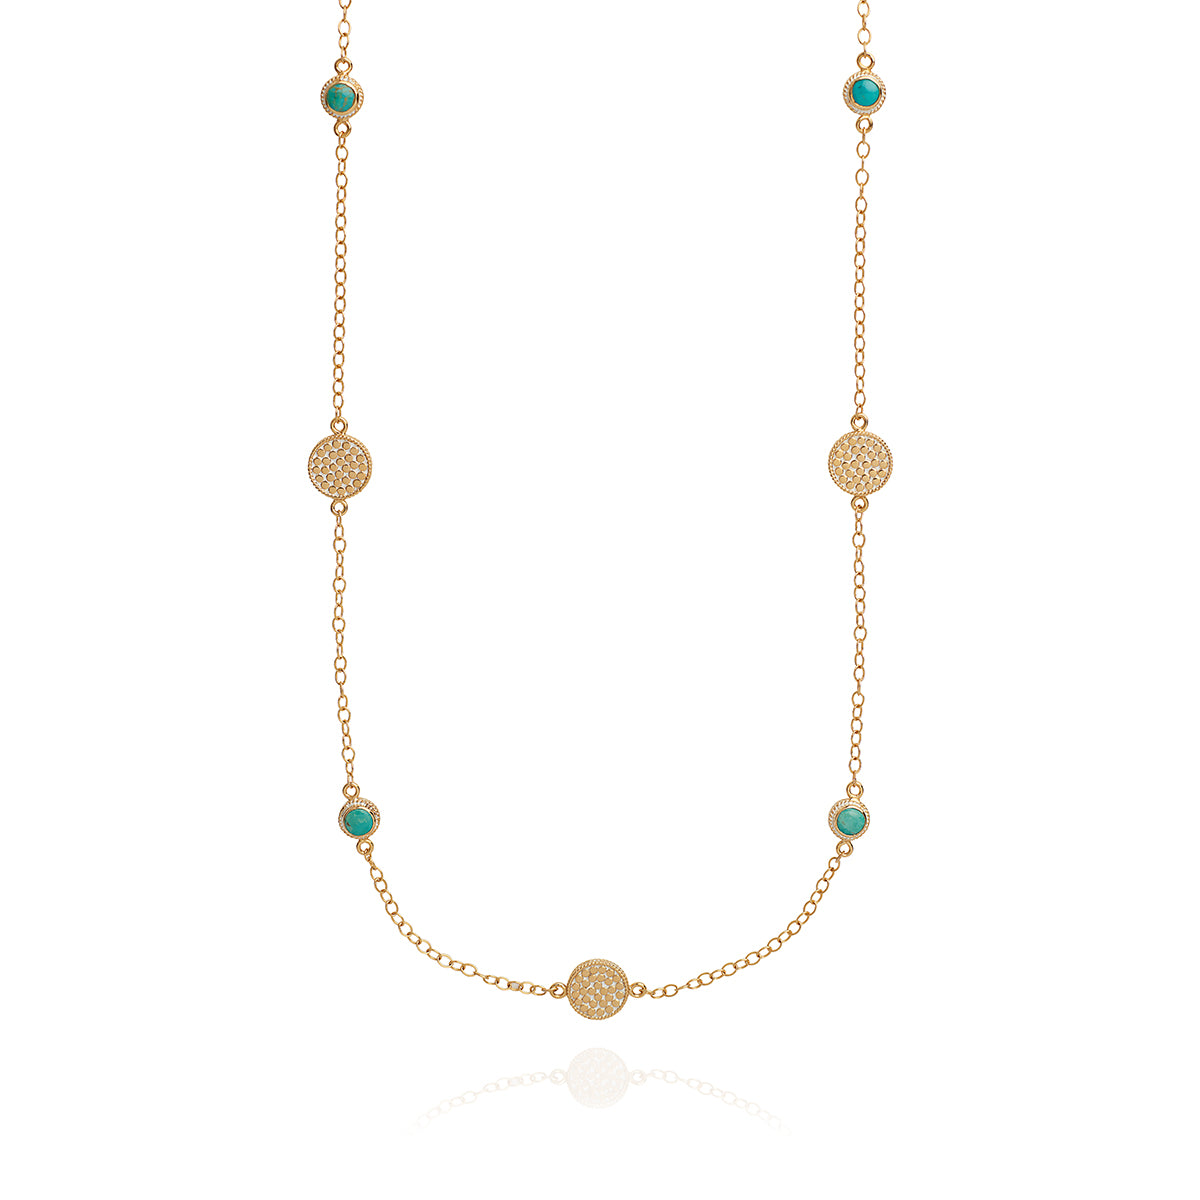 AB NK10085 Long multi disc necklace in gold, turquoise